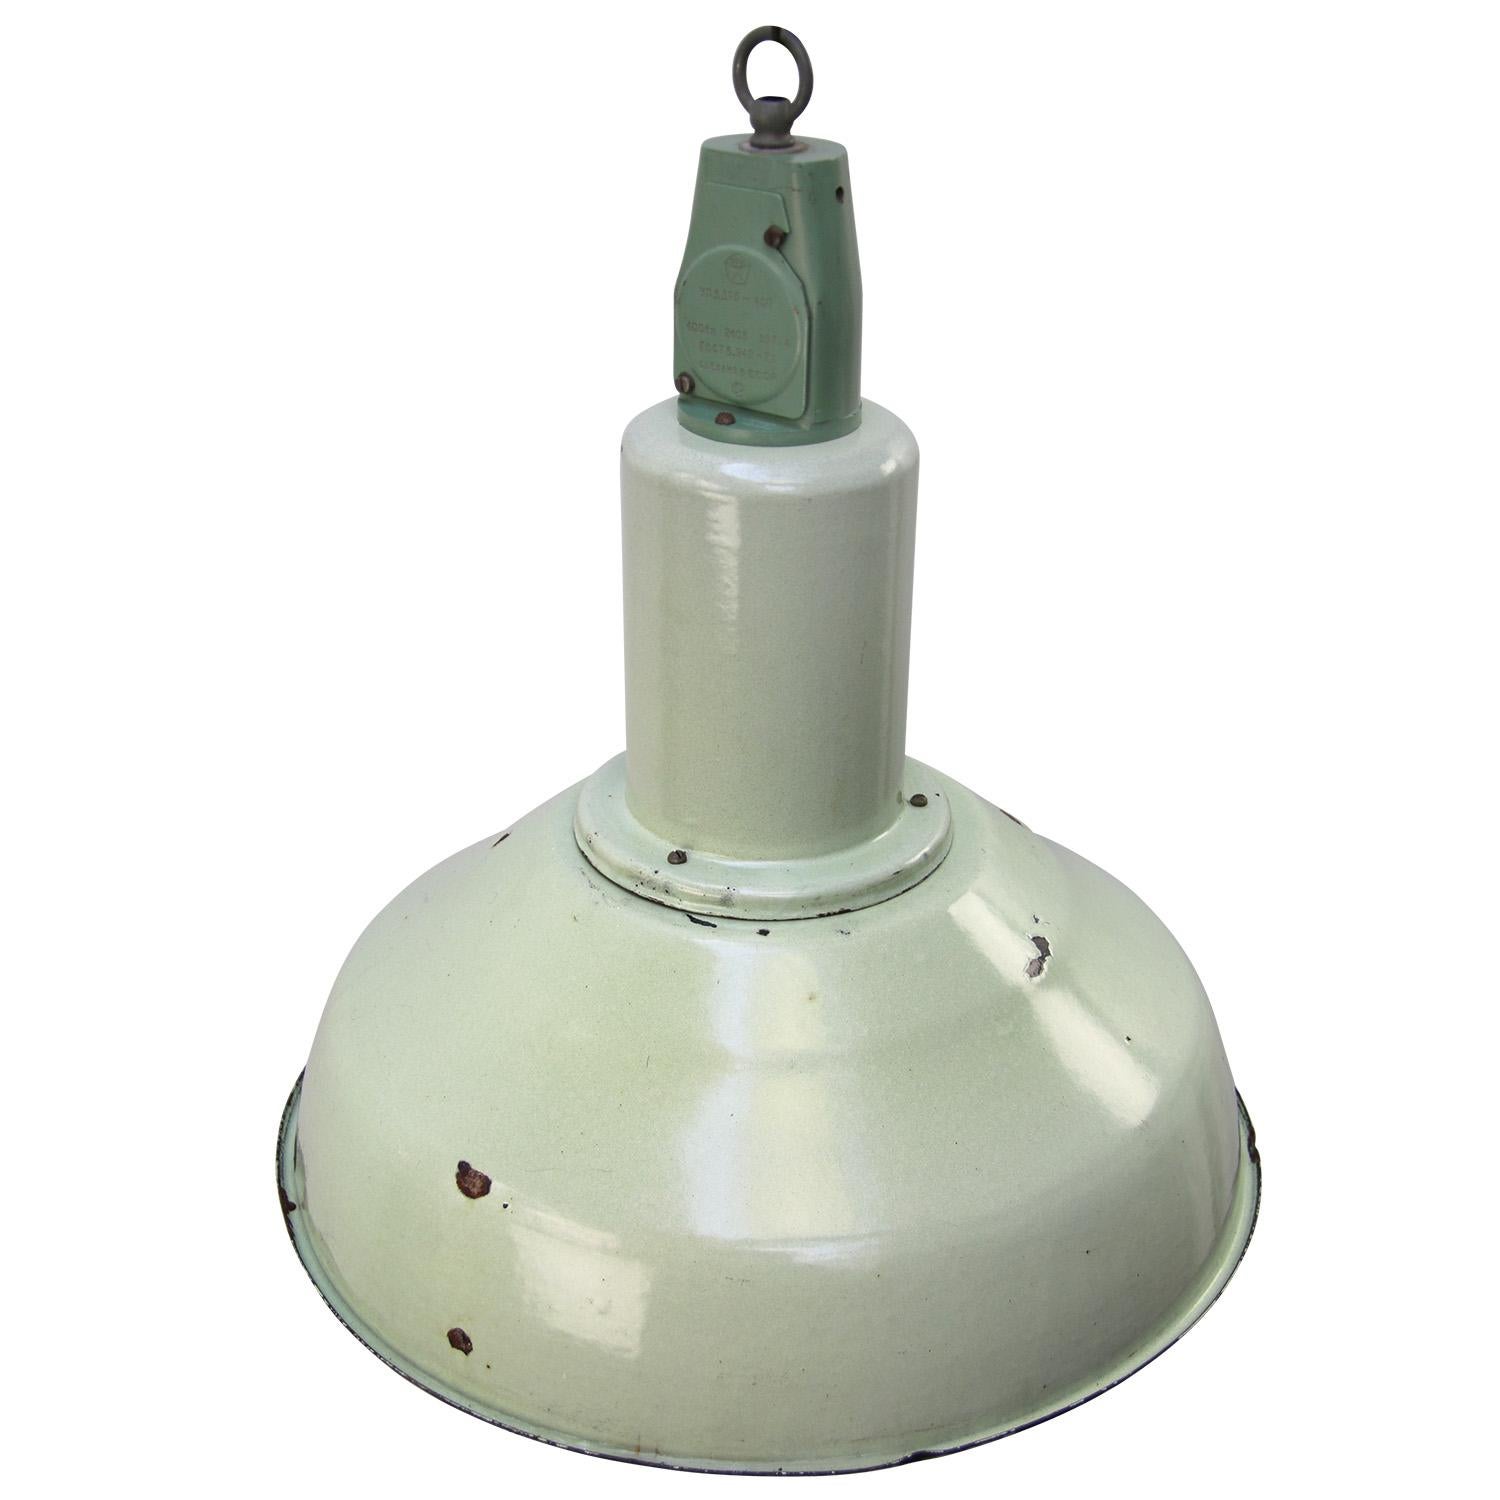 Enamel Industrial pendant
Light green enamel shade, white inside.
Green top.

Weight: 2.70 kg / 6 lb

Priced per individual item. All lamps have been made suitable by international standards for incandescent light bulbs, energy-efficient and